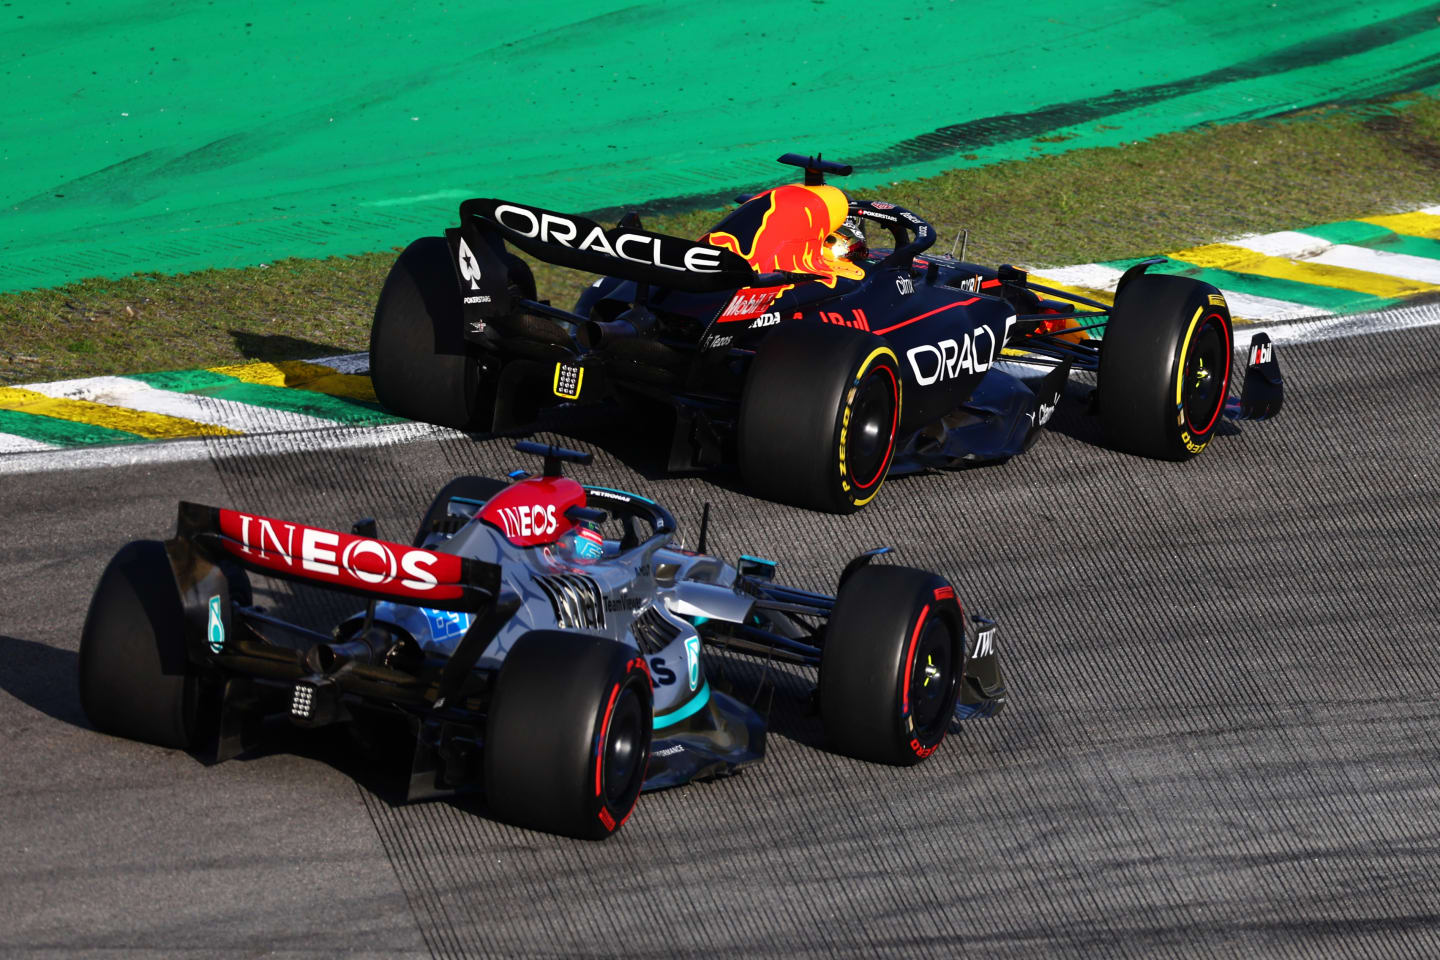 SAO PAULO, BRAZIL - NOVEMBER 12: Max Verstappen of the Netherlands driving the (1) Oracle Red Bull